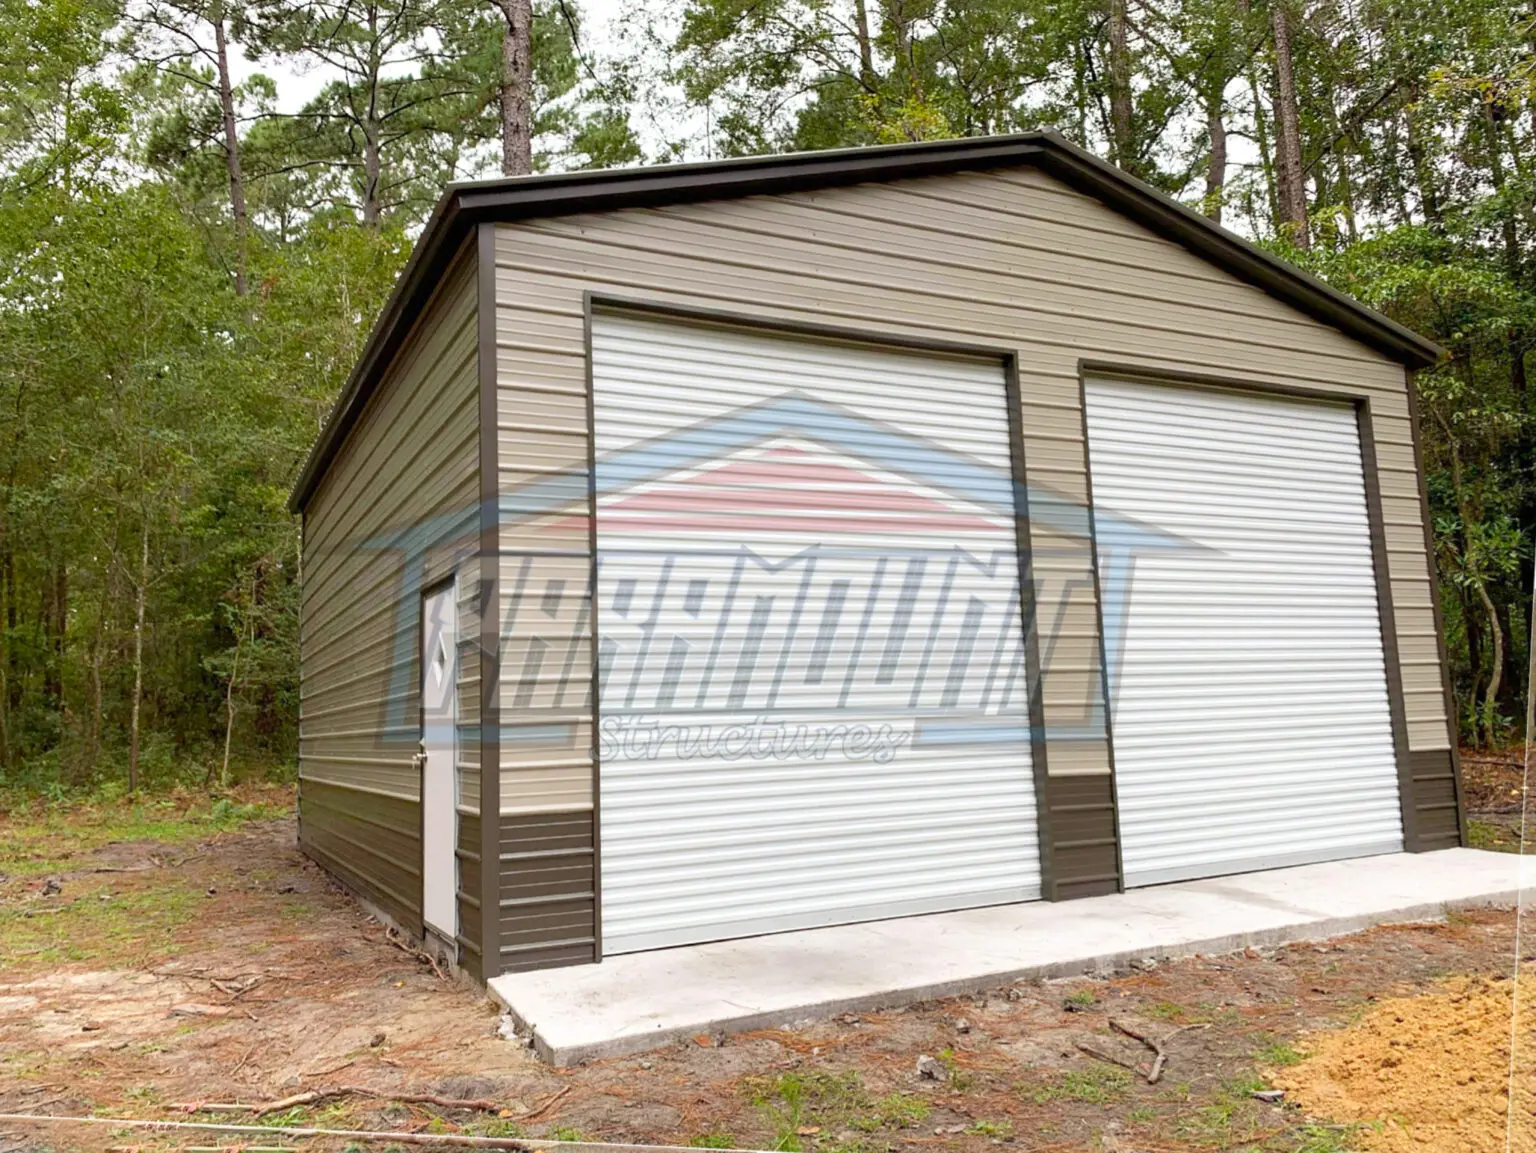 A brown and tan metal garage in the woods.